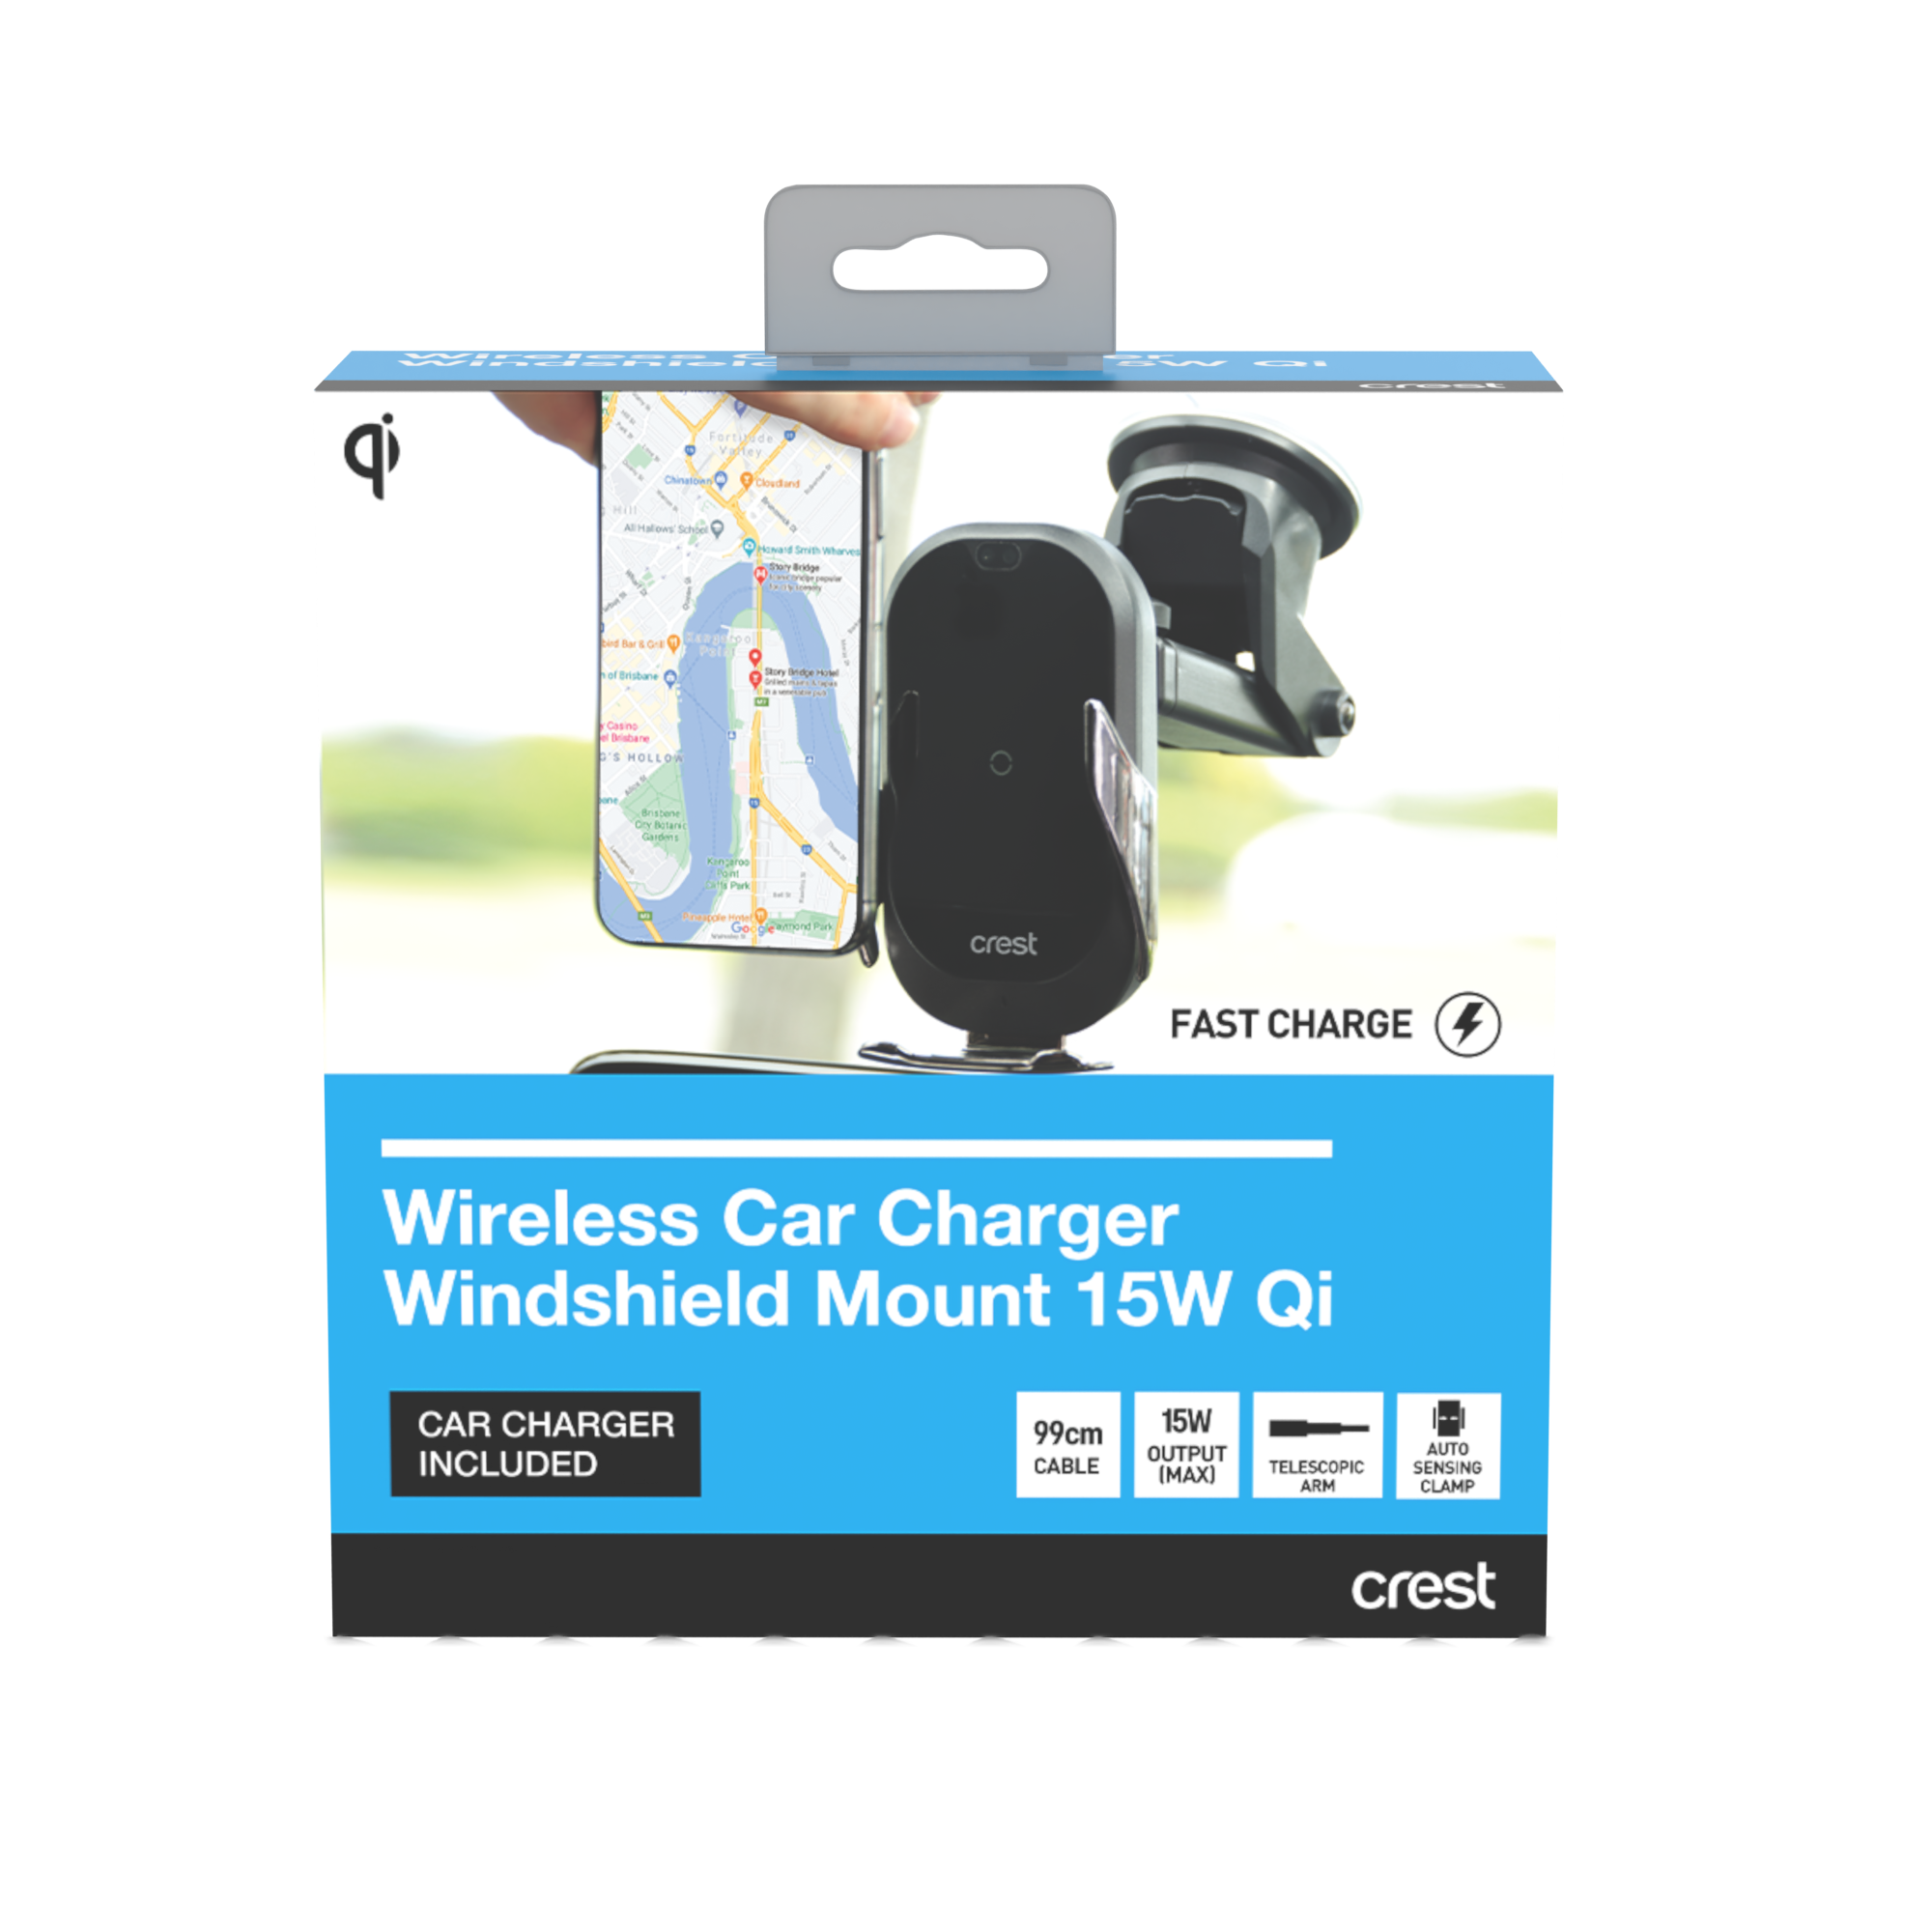 Wireless 15W Phone Charger - Windshield Mount